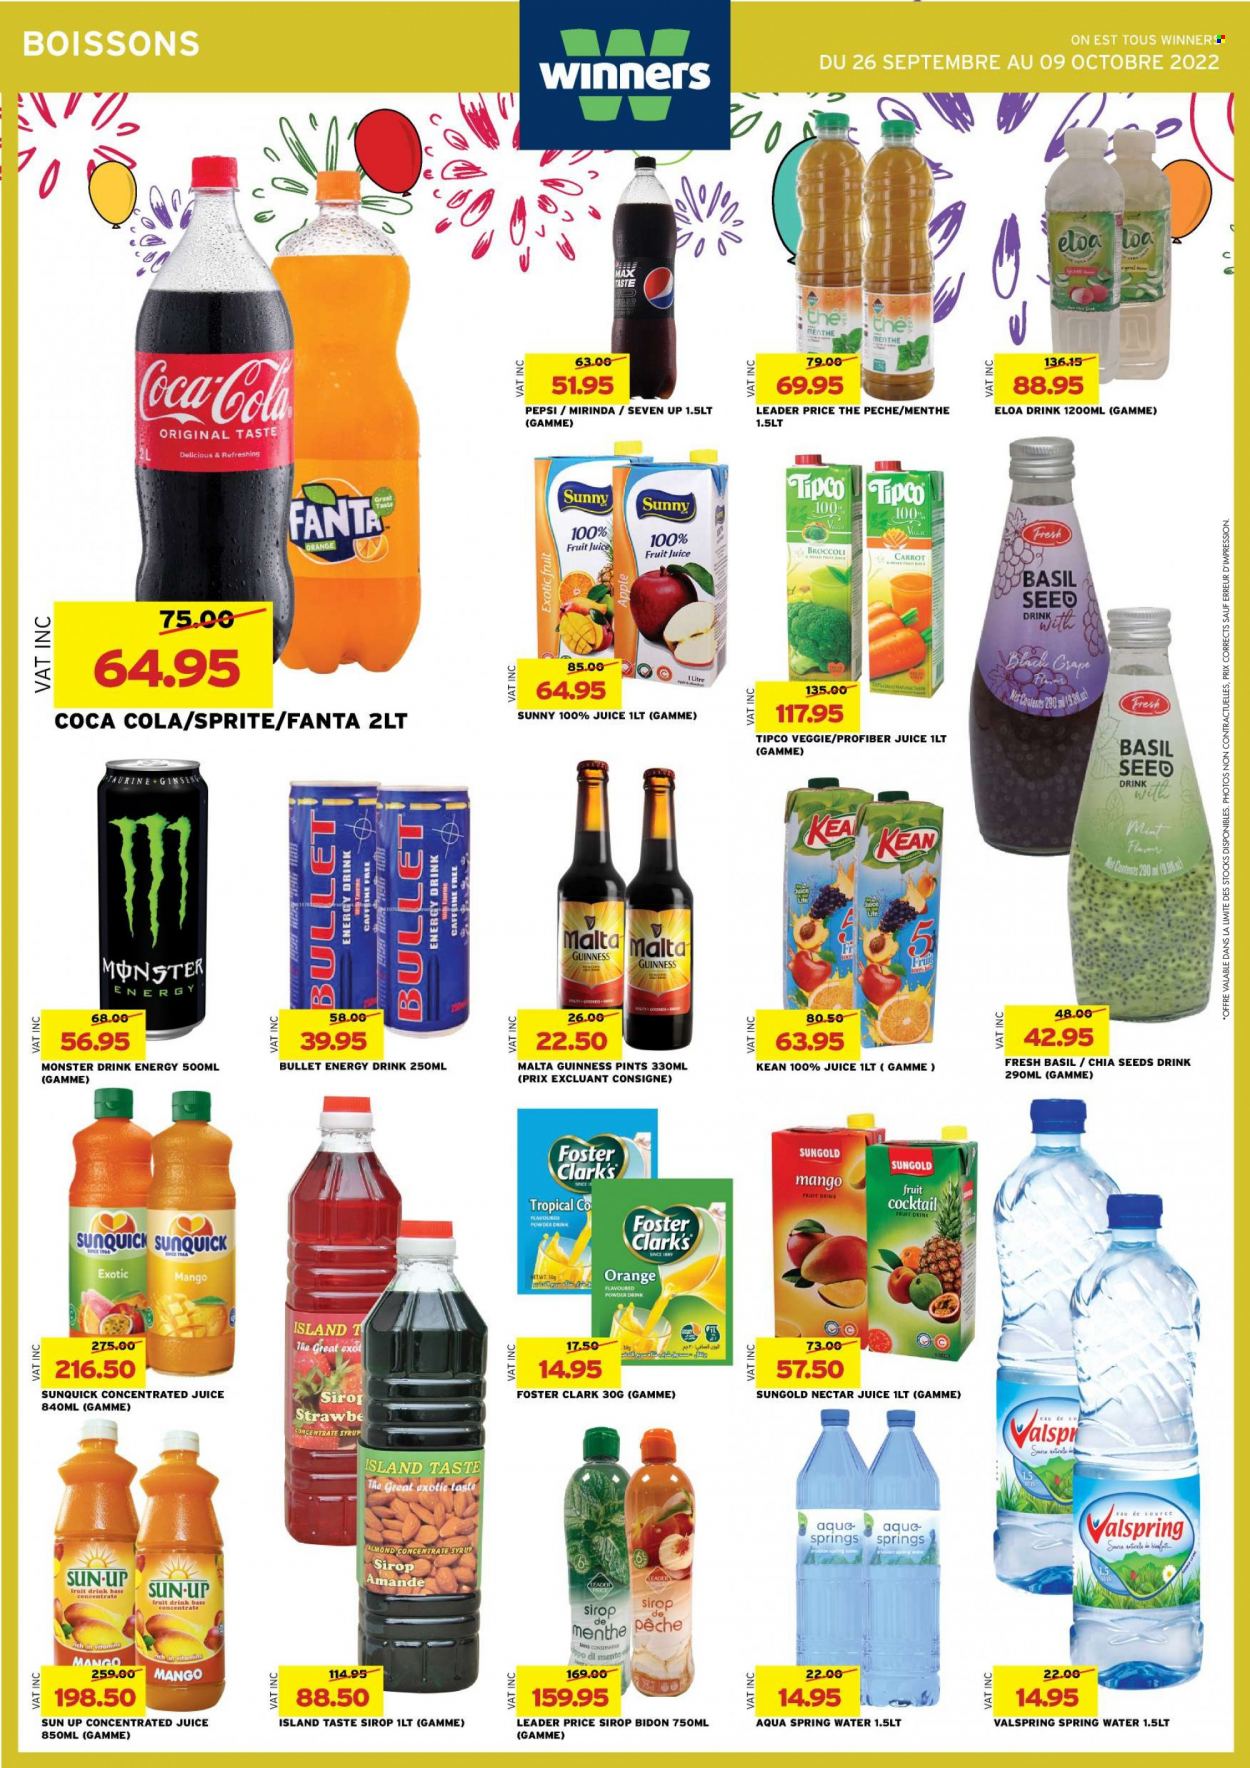 thumbnail - Winner's Catalogue - 26.09.2022 - 9.10.2022 - Sales products - broccoli, mango, oranges, chia seeds, syrup, Coca-Cola, Sprite, Pepsi, juice, fruit juice, Fanta, energy drink, Monster, fruit drink, 7UP, Monster Energy, spring water, powder drink, Guinness, pet bed, ginseng. Page 20.